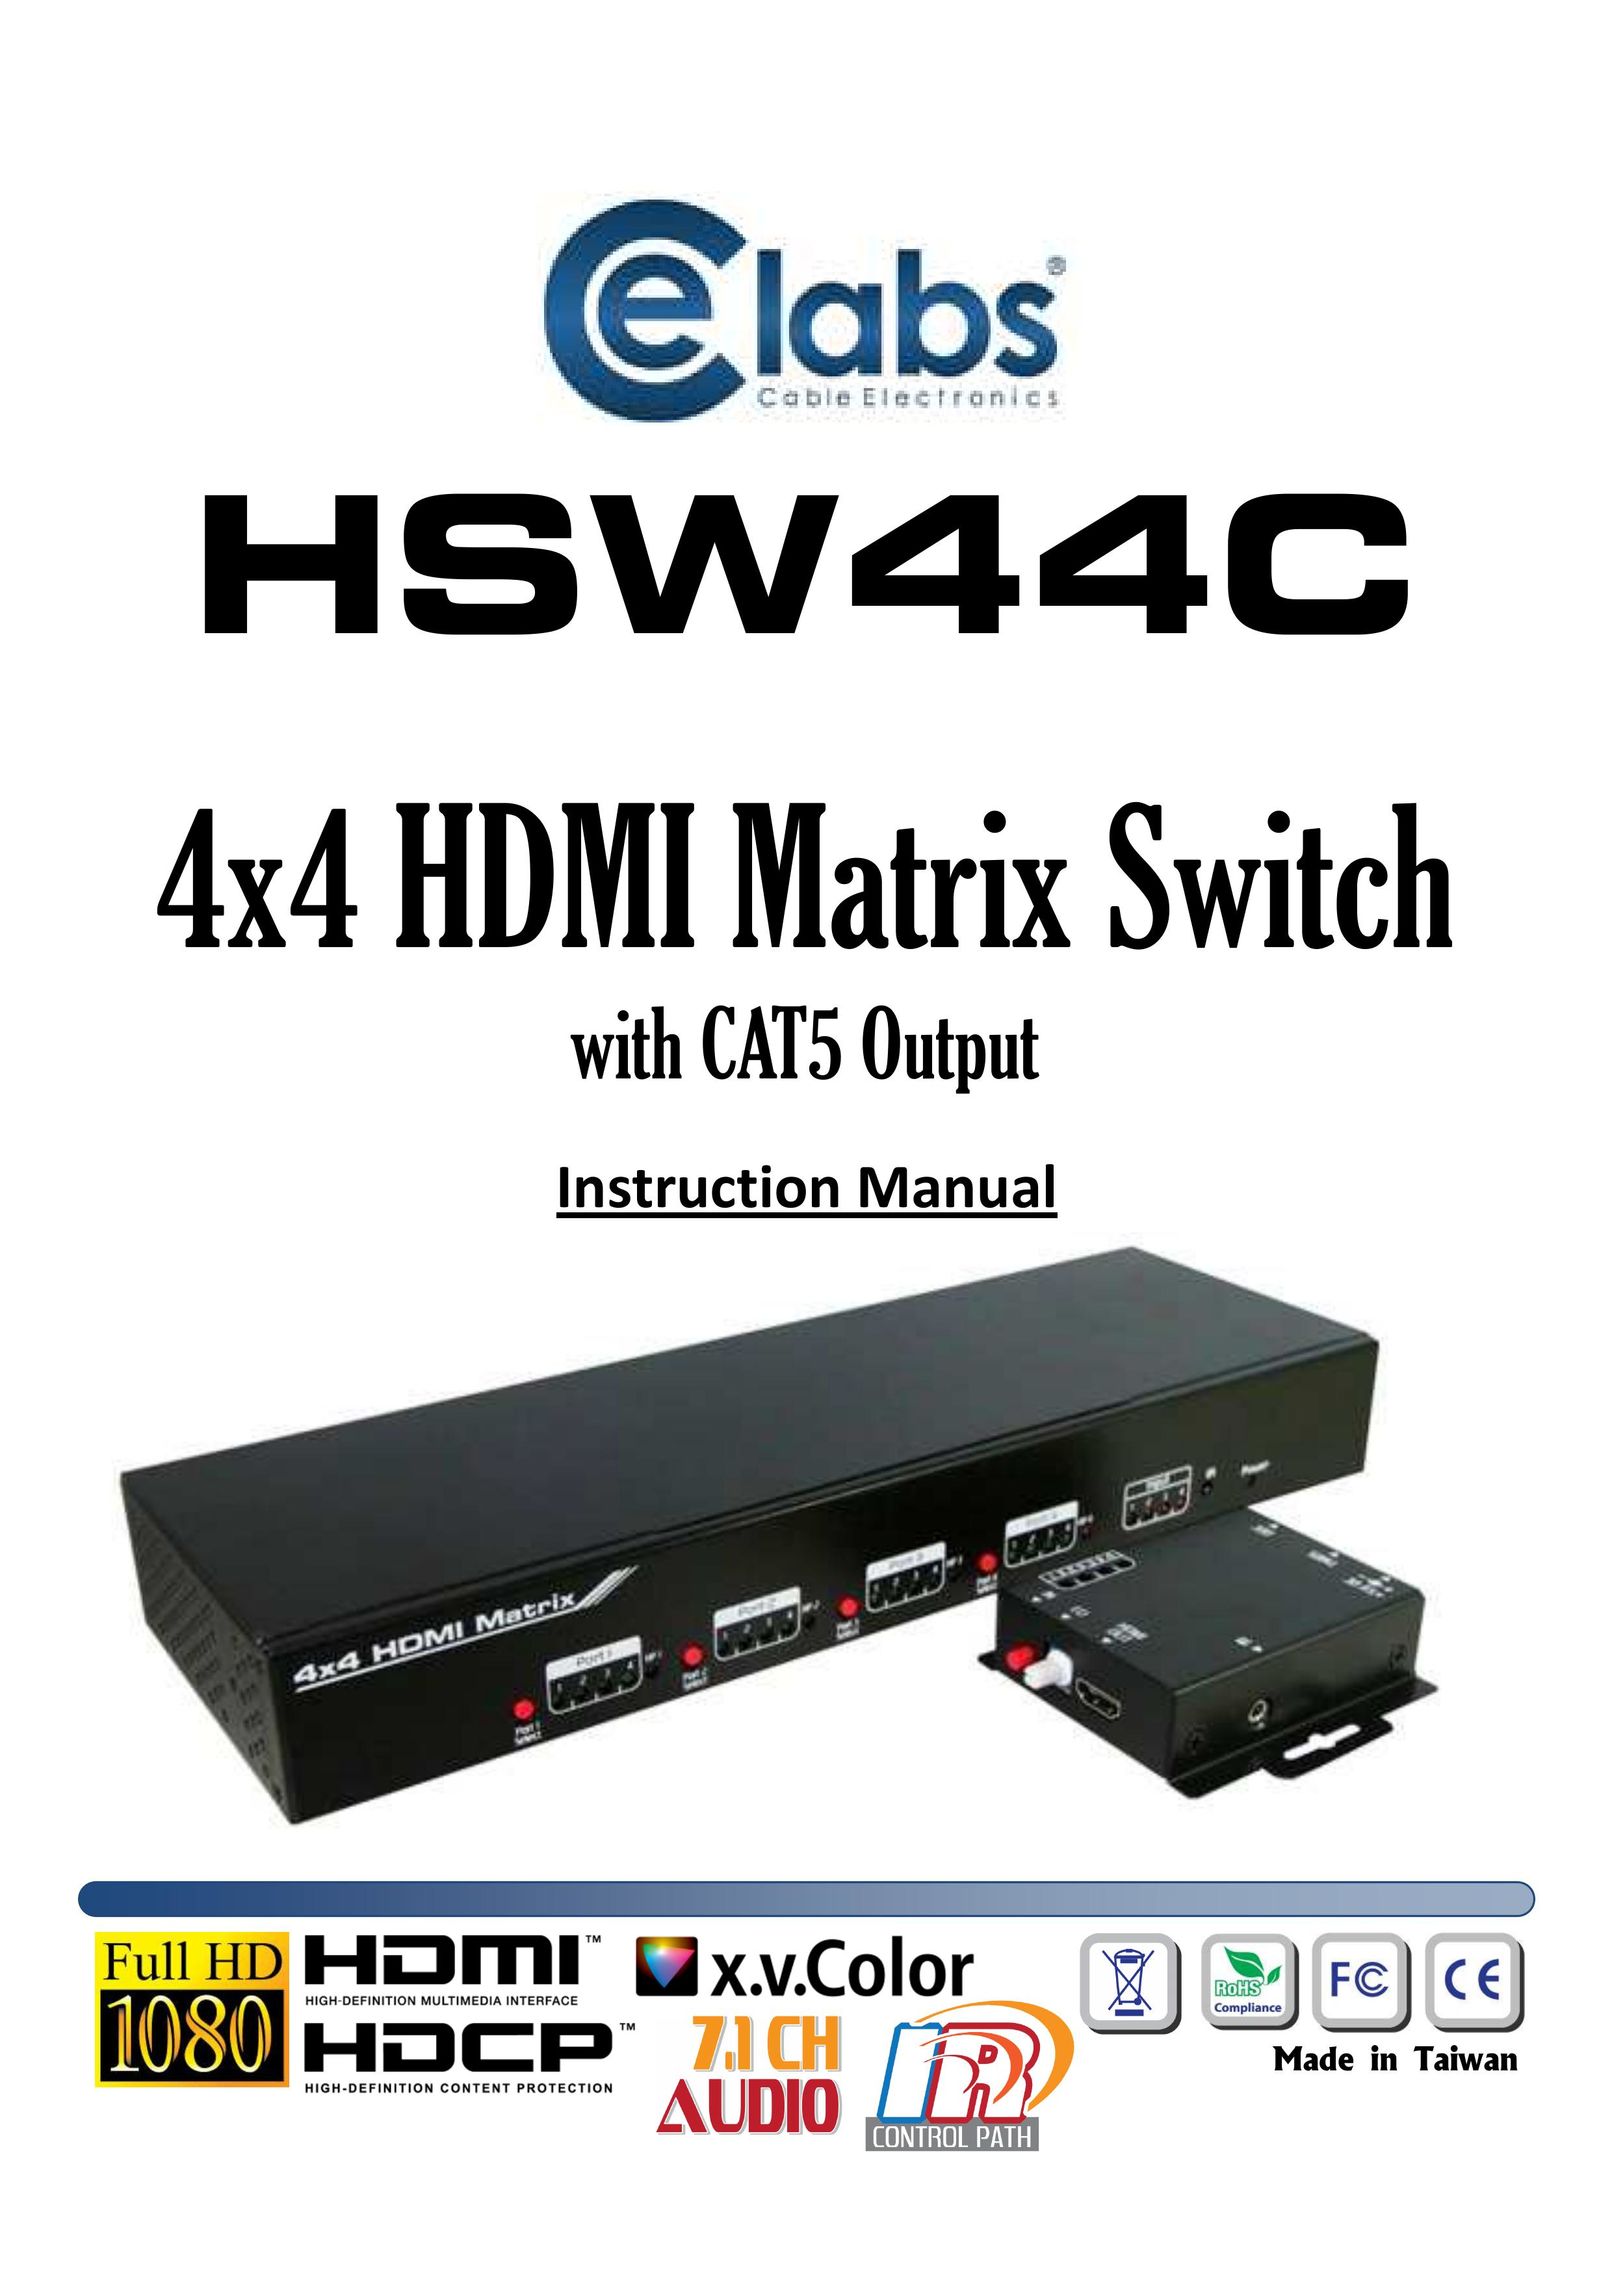 Cable Electronics HSW44C Switch User Manual